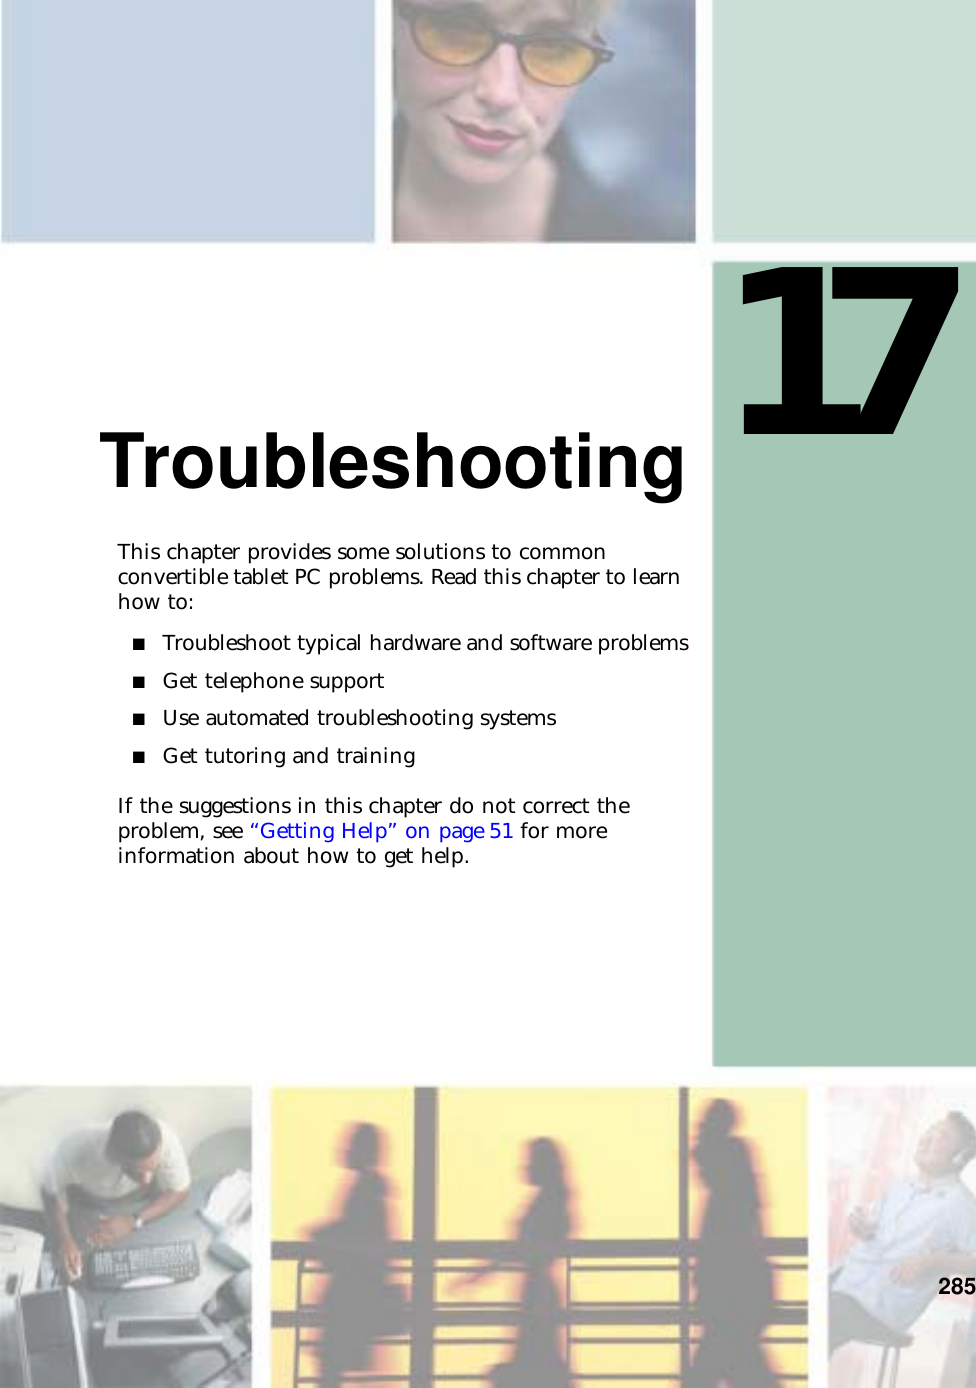 17285TroubleshootingThis chapter provides some solutions to common convertible tablet PC problems. Read this chapter to learn how to:■Troubleshoot typical hardware and software problems■Get telephone support■Use automated troubleshooting systems■Get tutoring and trainingIf the suggestions in this chapter do not correct the problem, see “Getting Help” on page 51 for more information about how to get help.